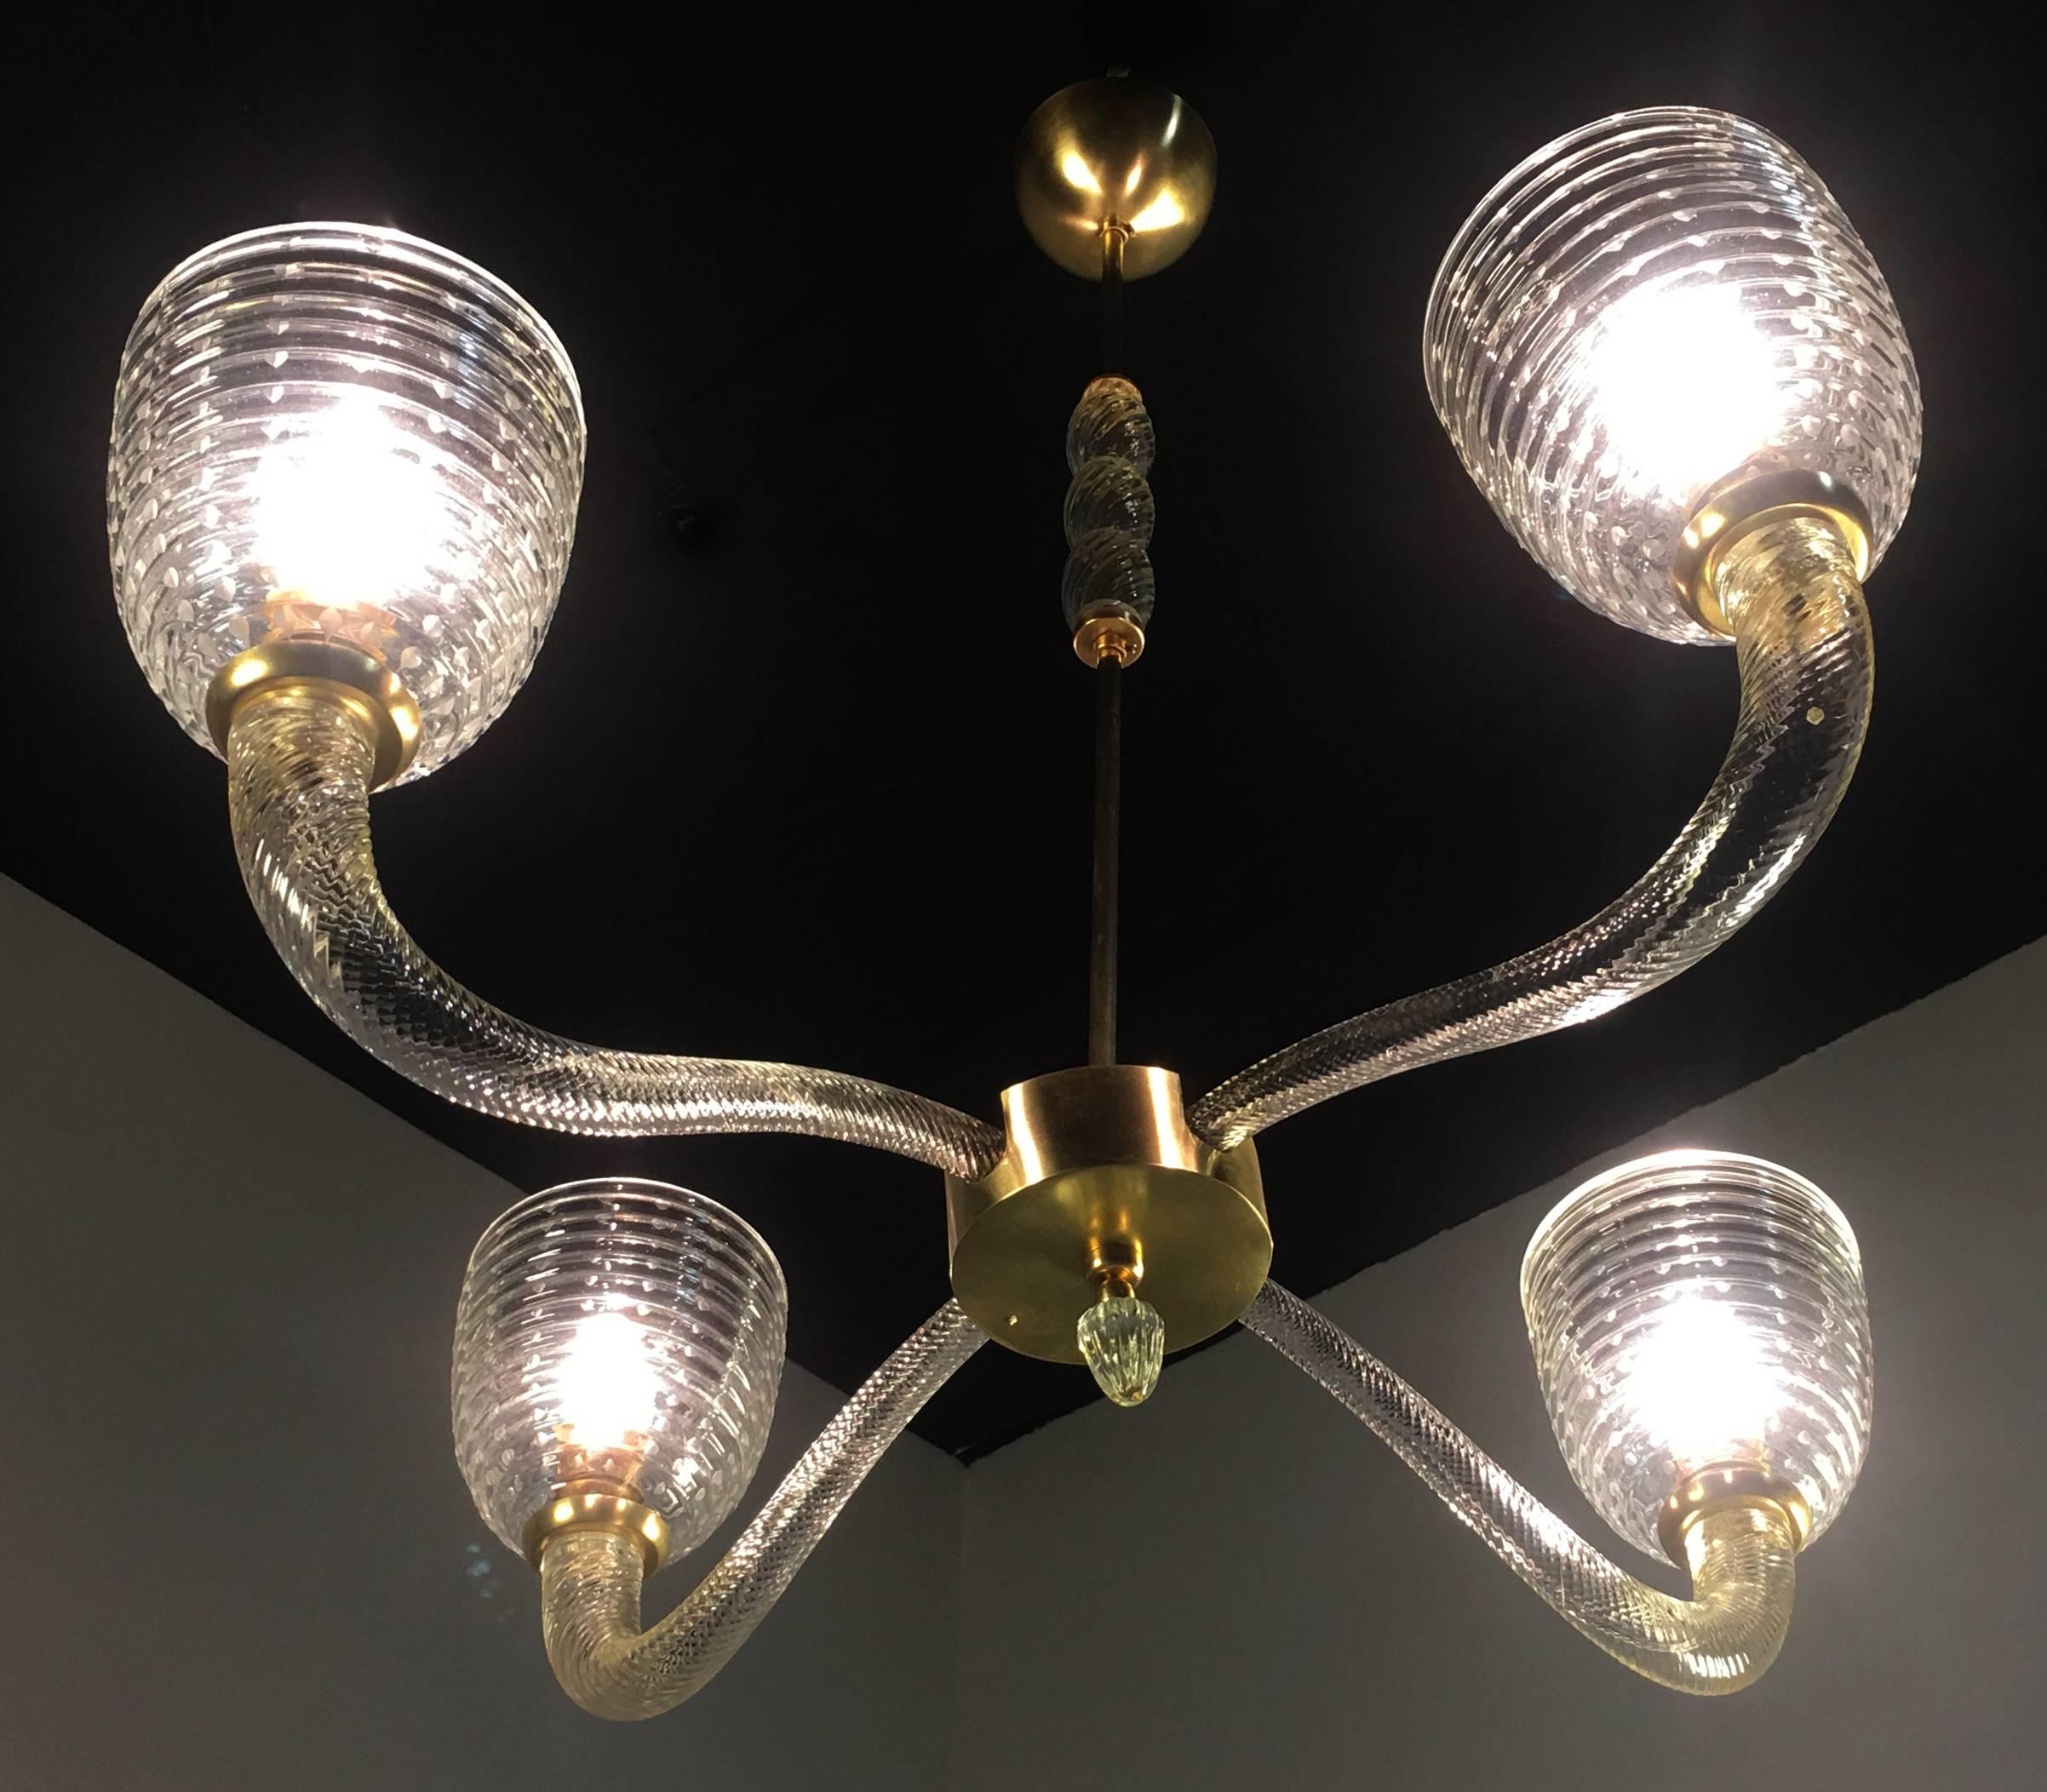 Charming chandelier by Venini.